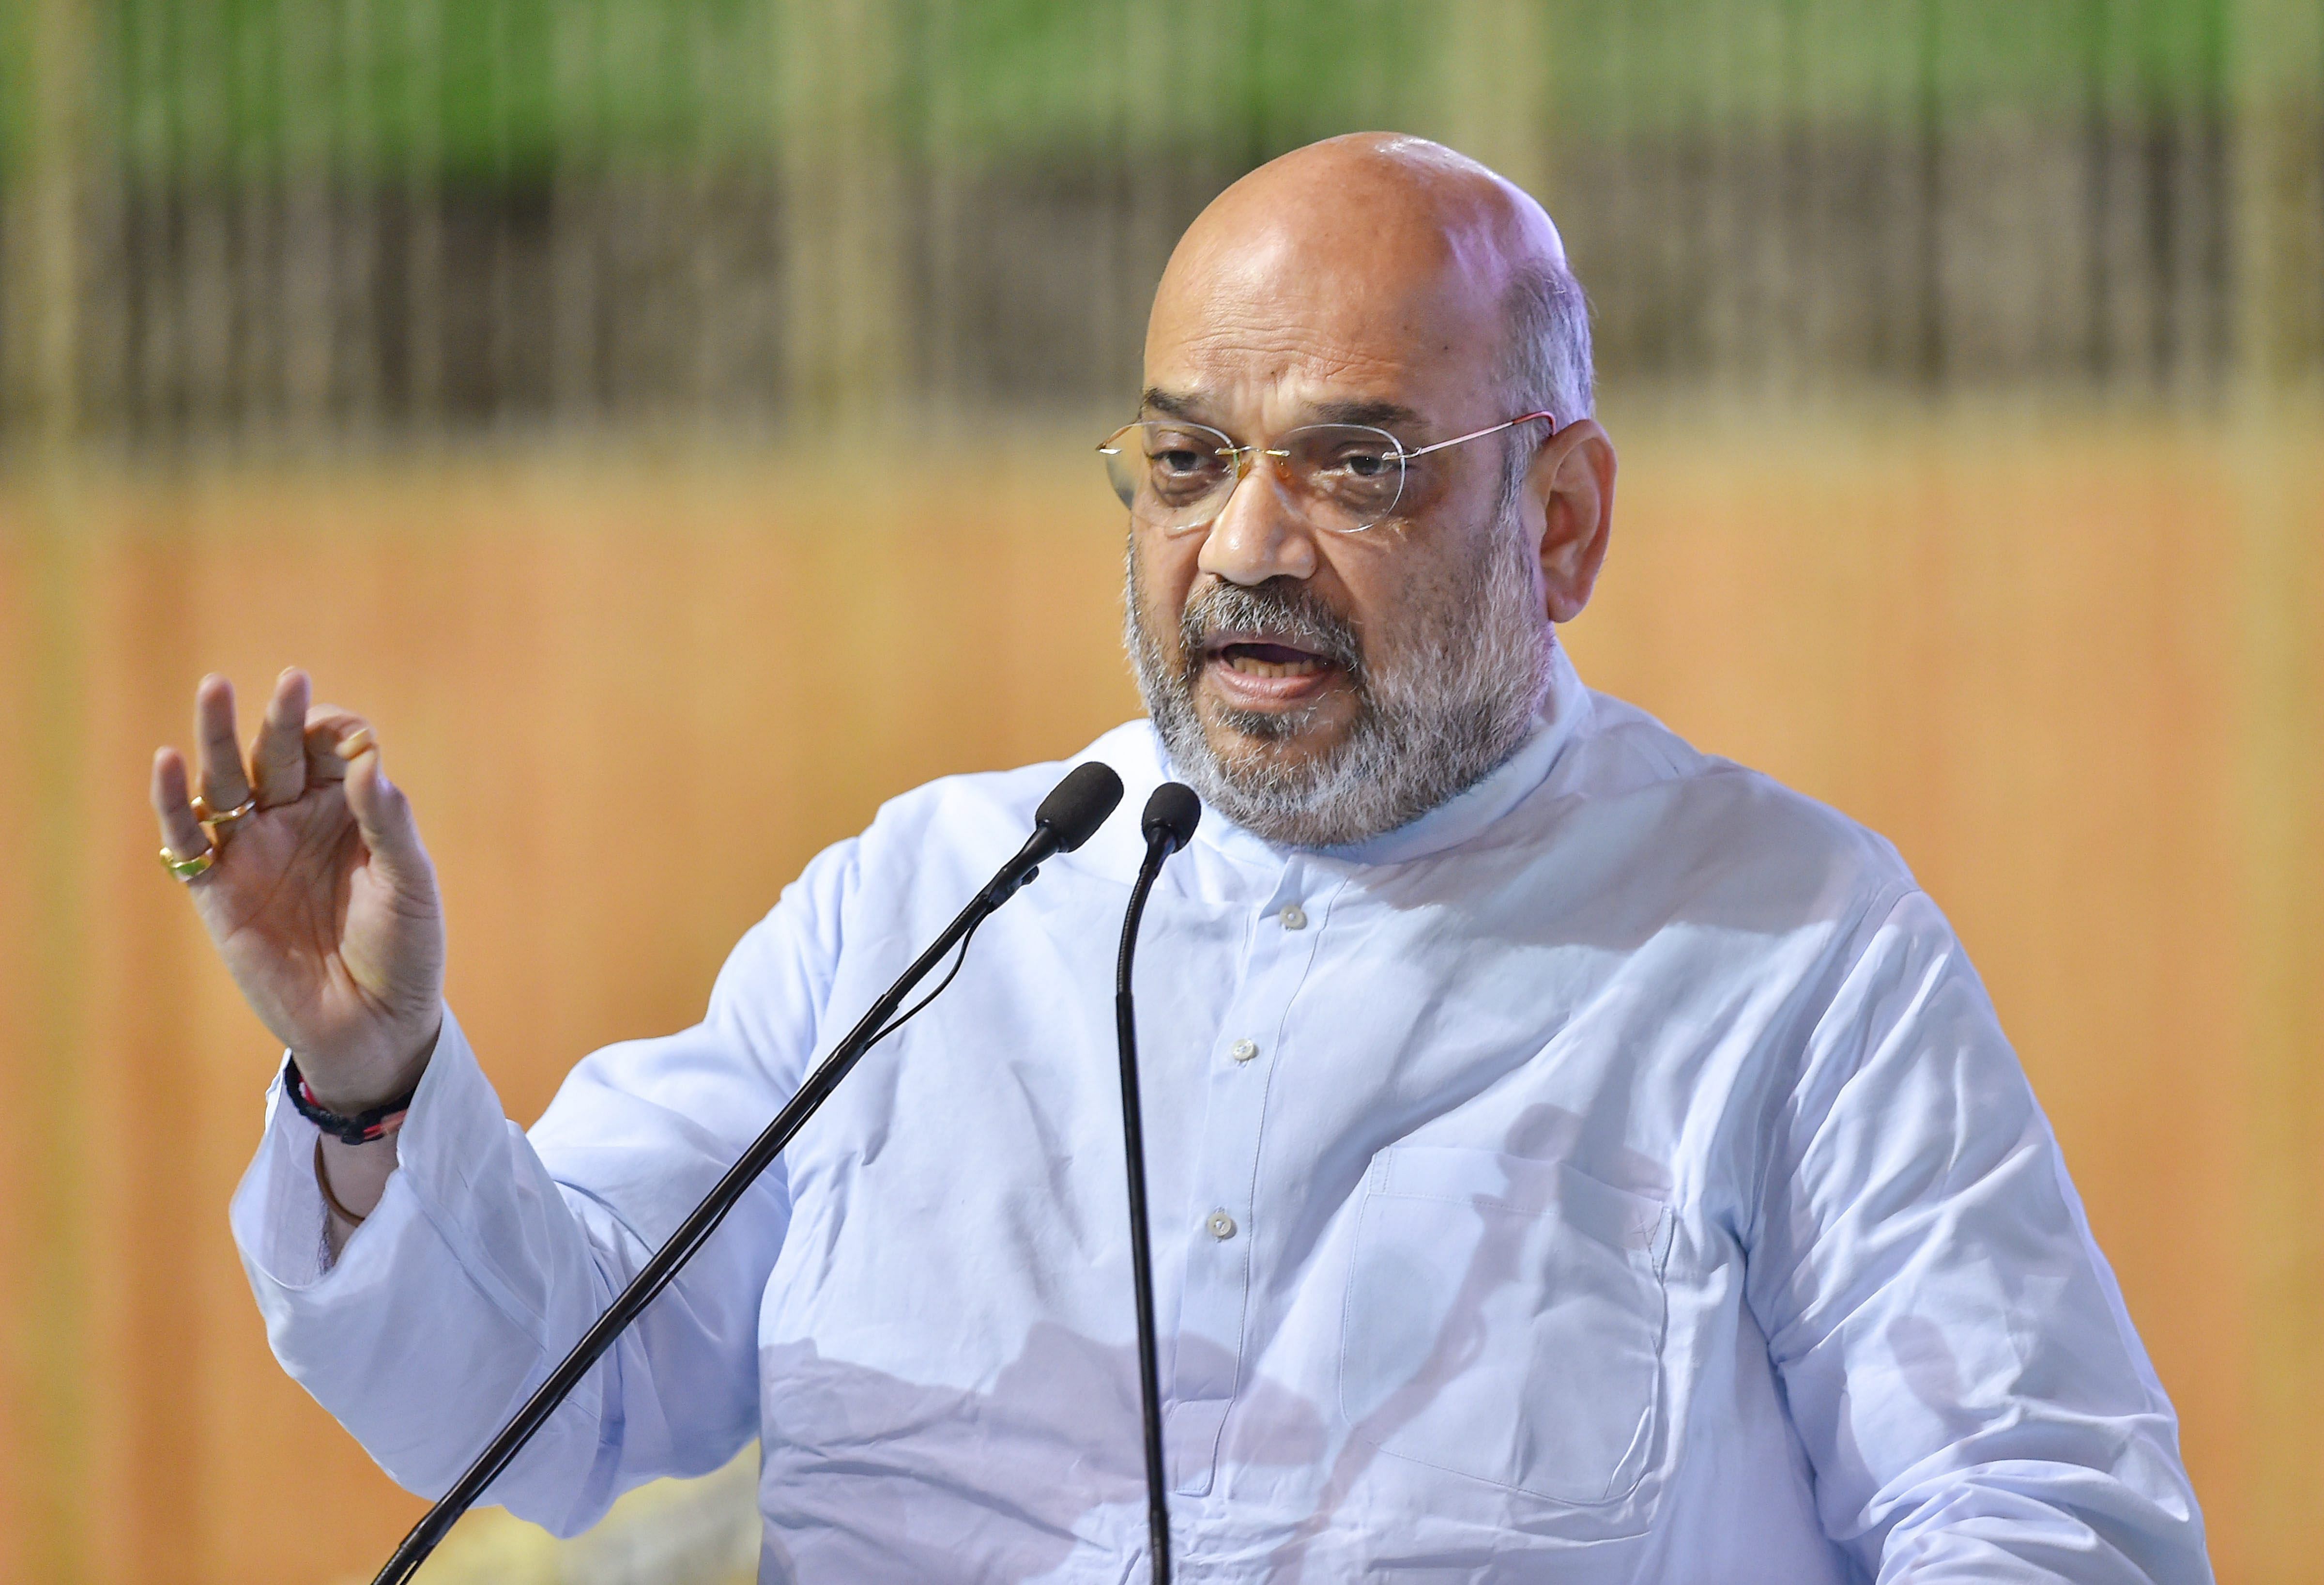 After DMK sent out invites, BJP MP Subramanian Swamy tweeted that BJP president Amit Shah has decided not to participate in the memorial event. However, DMK leaders said they have not received any information about cancellation of Shah's visit. PTI